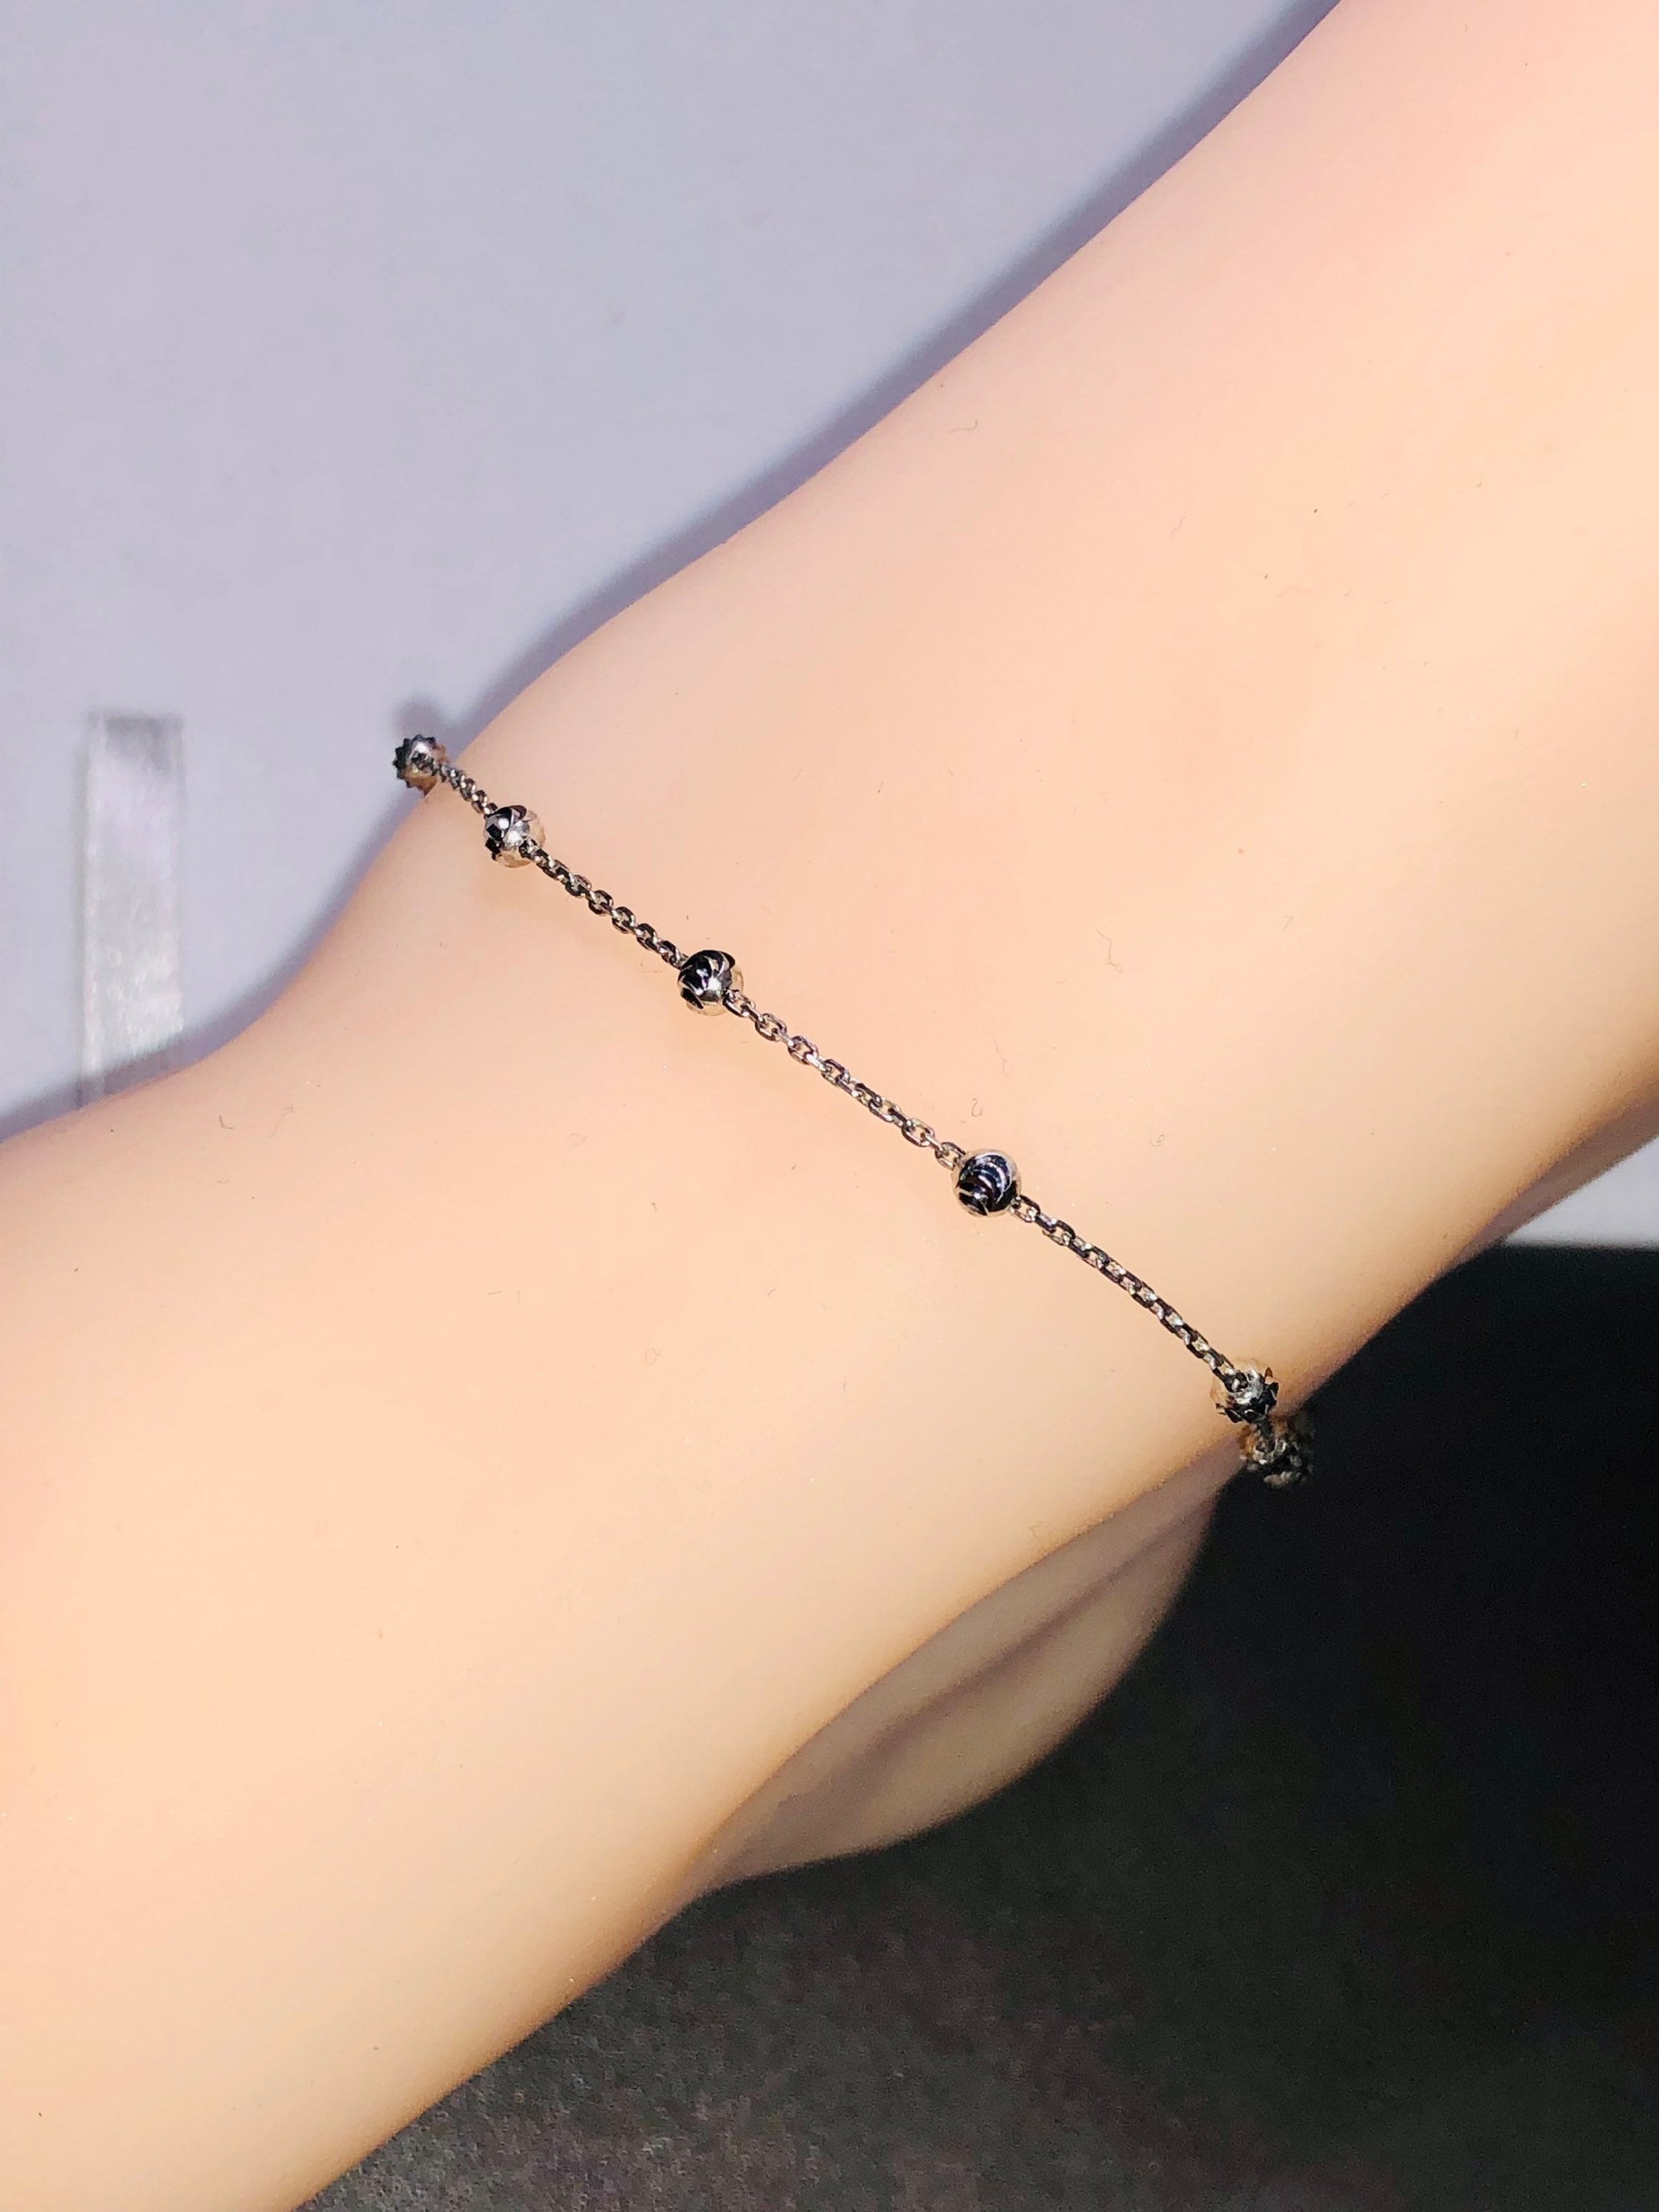 10k white gold vermeil beaded anklet for women diamond cut look perfect for everyday wear best gift for women huge sale holiday gift